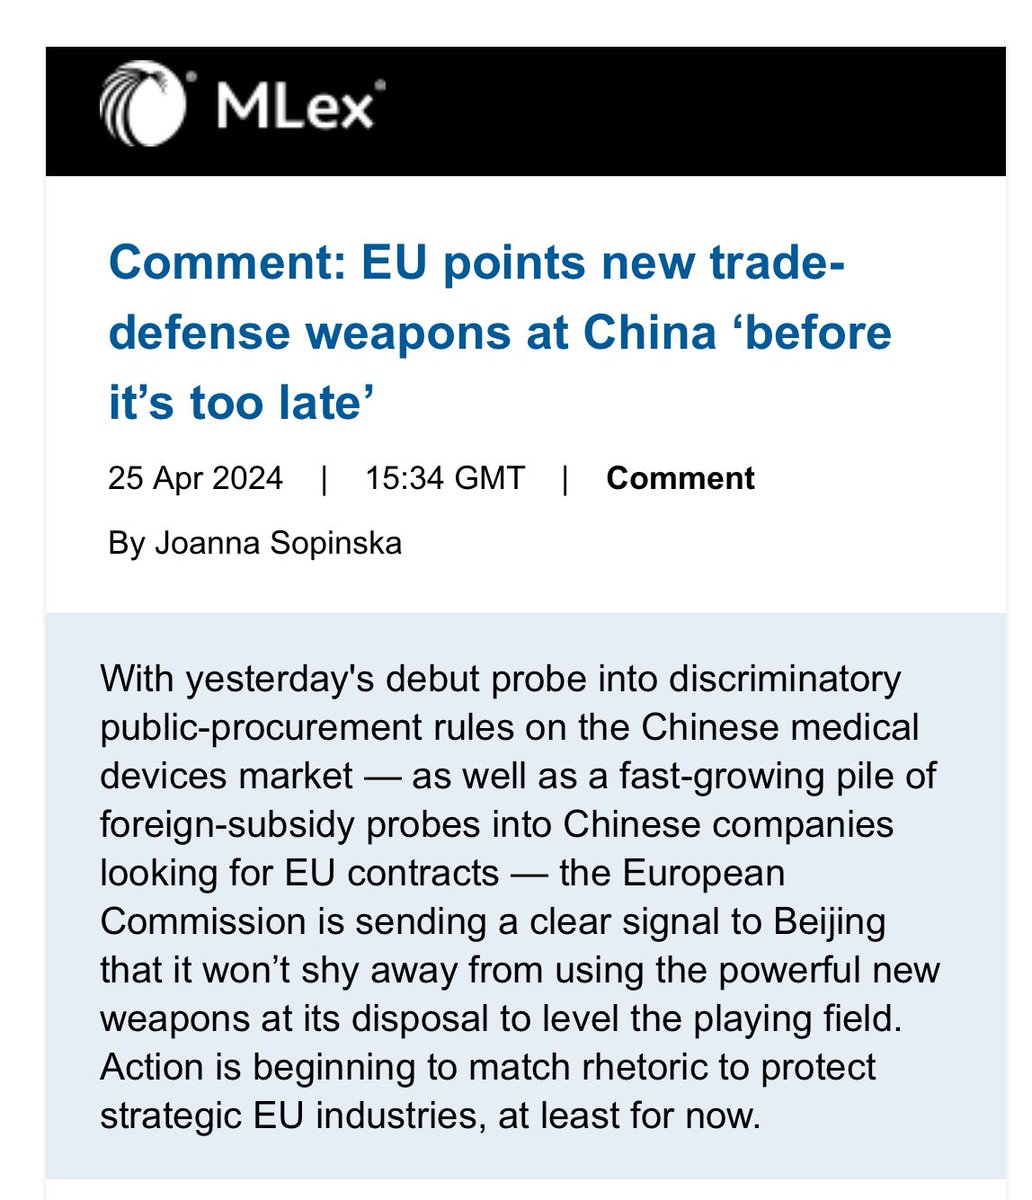 Action is beginning to match tougher EU rhetoric on 🇨🇳 . „The simultaneous deployment of the procurement and foreign subsidies tools shows the commission is trying to take a more systemic approach and cut across the landscape of China’s unfair practices.” bit.ly/3Ql12a1